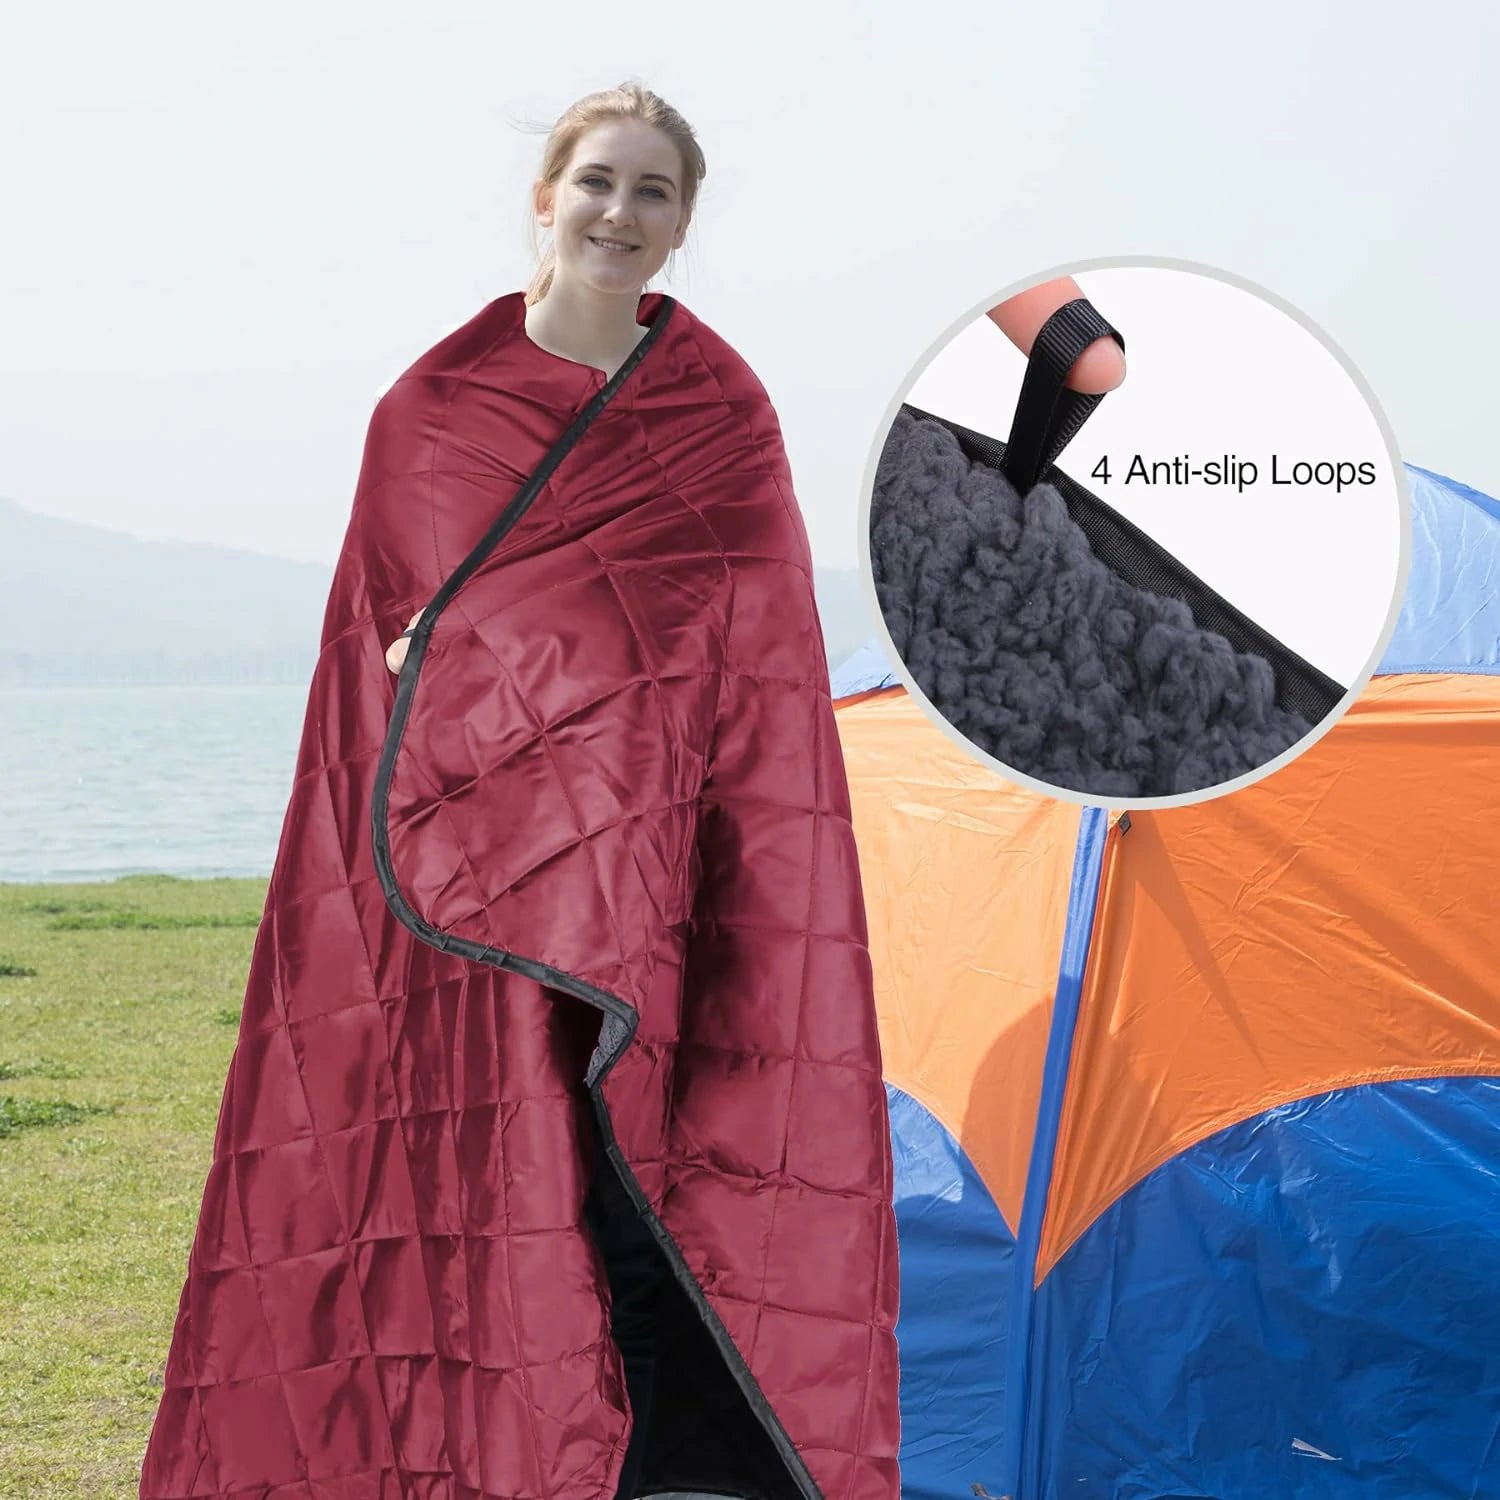 REDCAMP Large Camping Blanket with Sherpa Lining